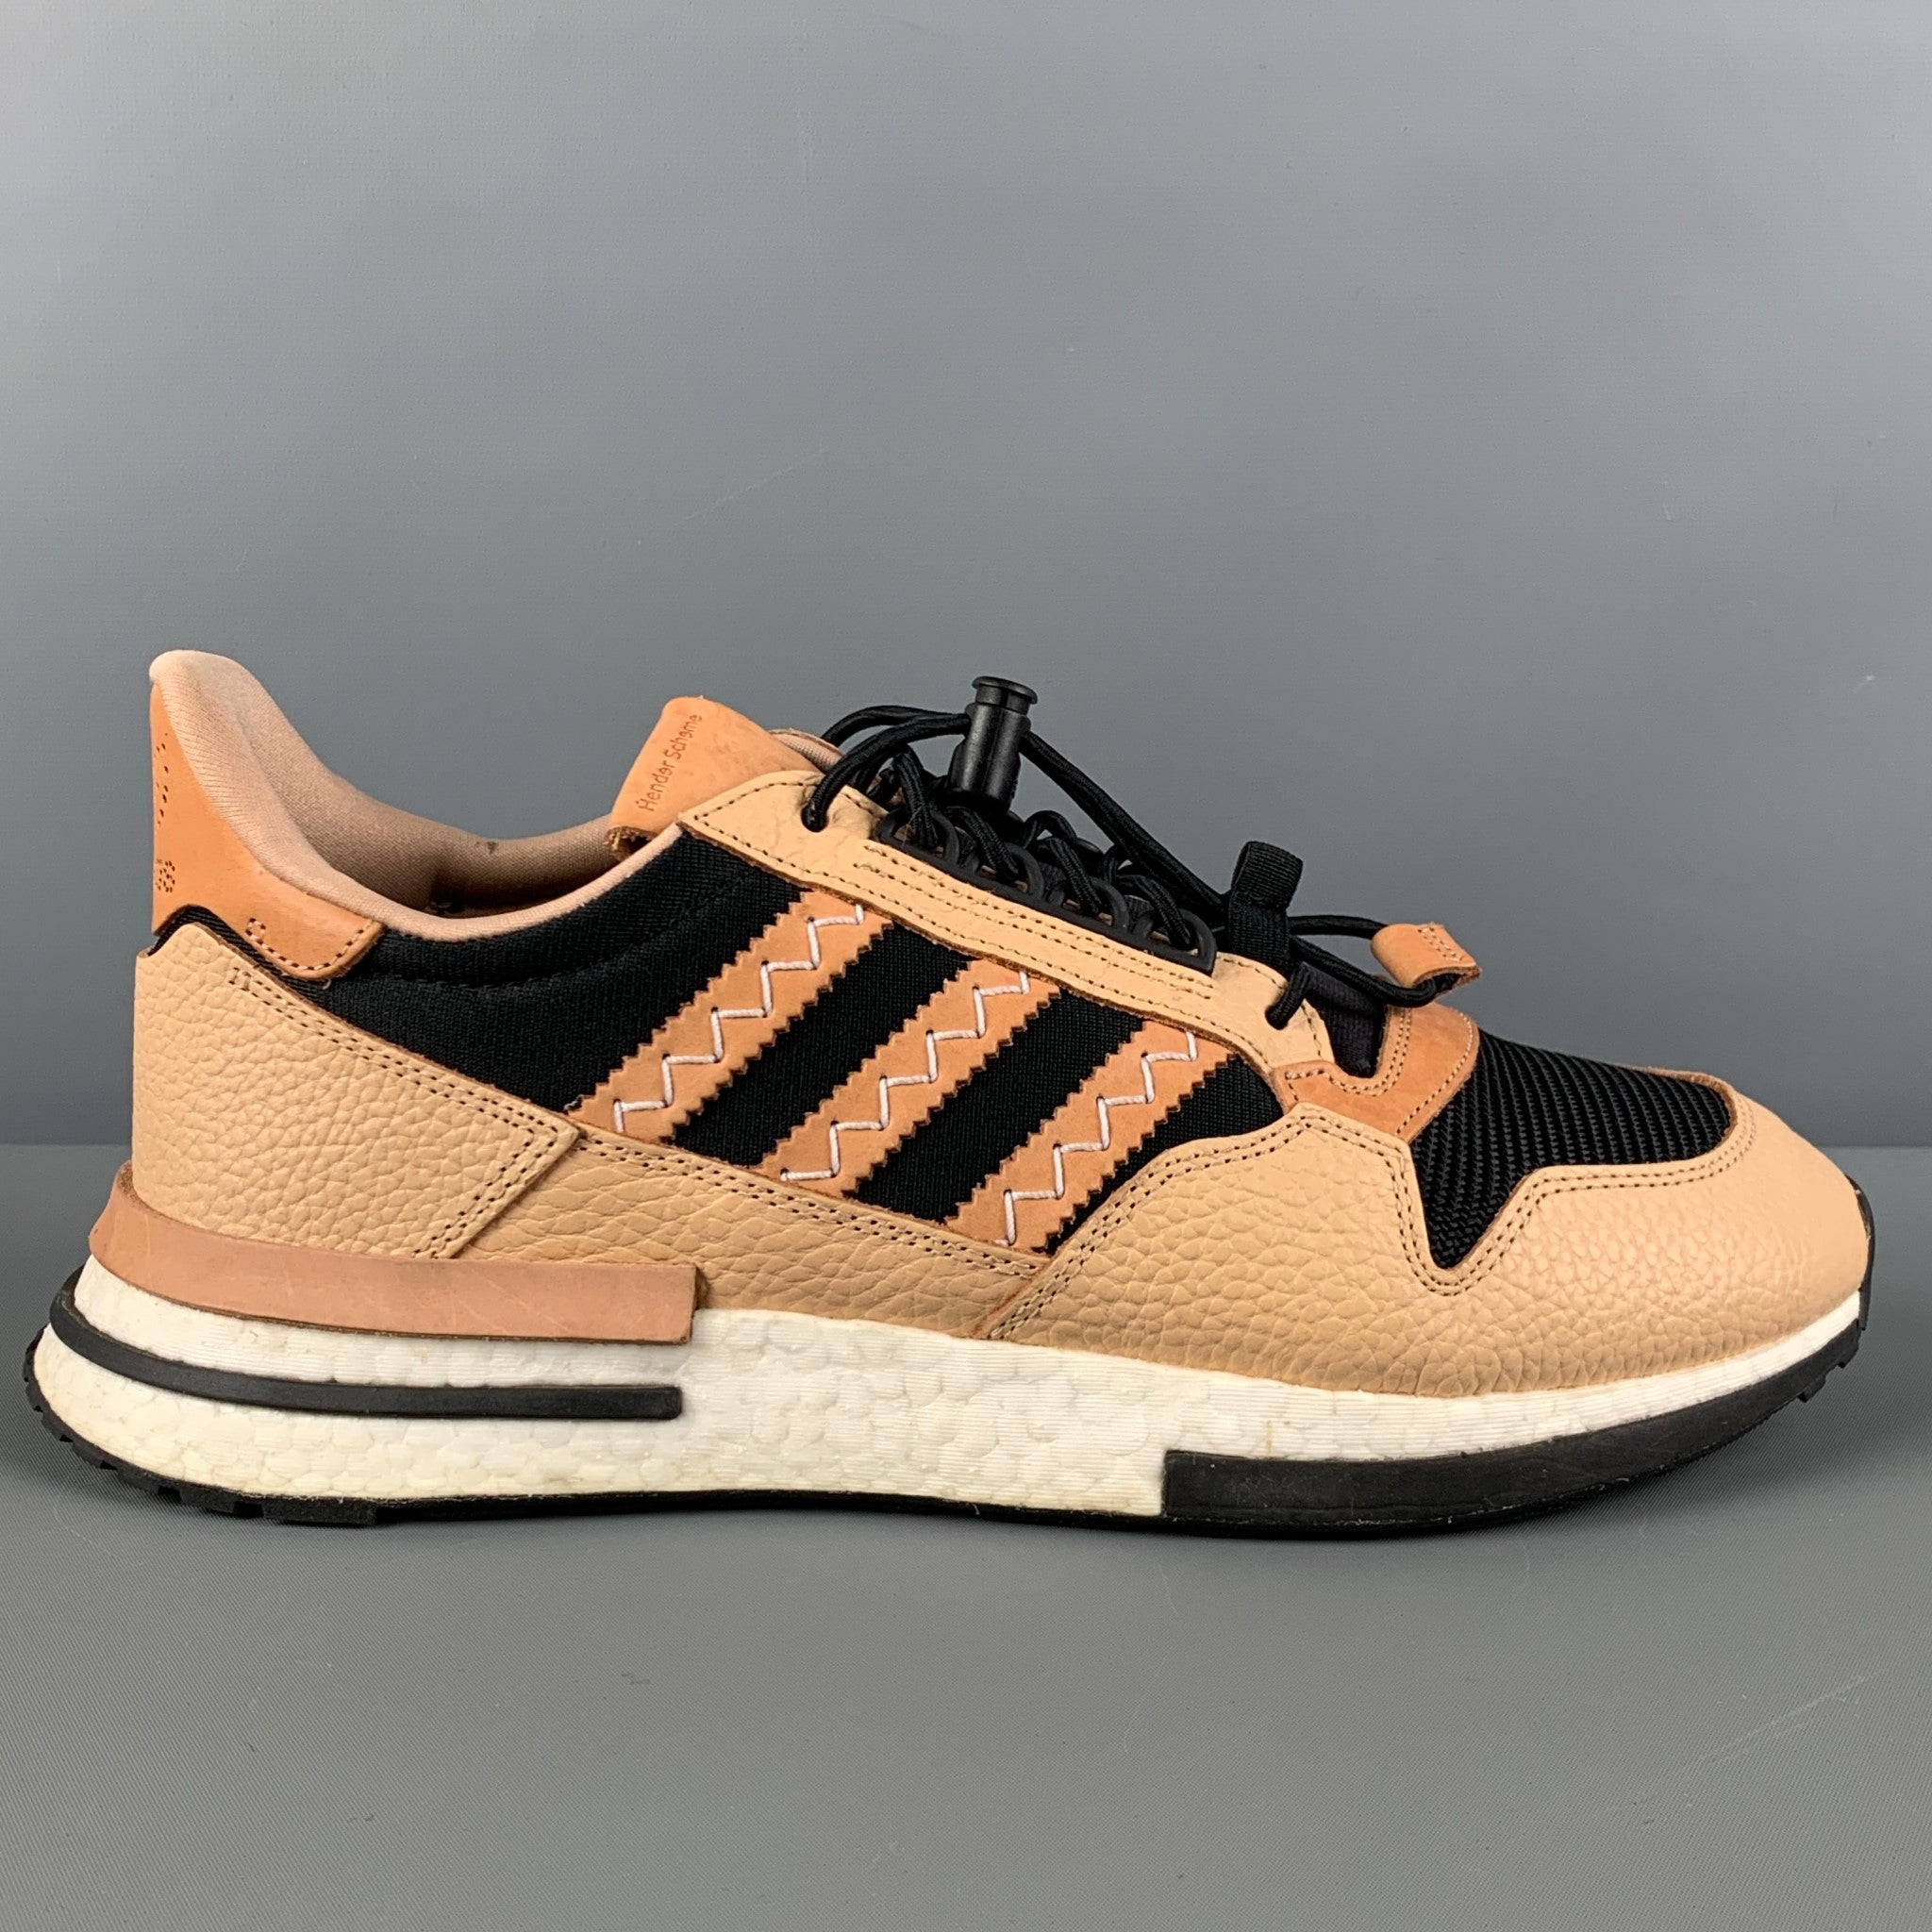 ADIDAS x HENDER SCHEME Size 10.5 Tan Black Mixed Materials Leather Lace Up  Sneakers